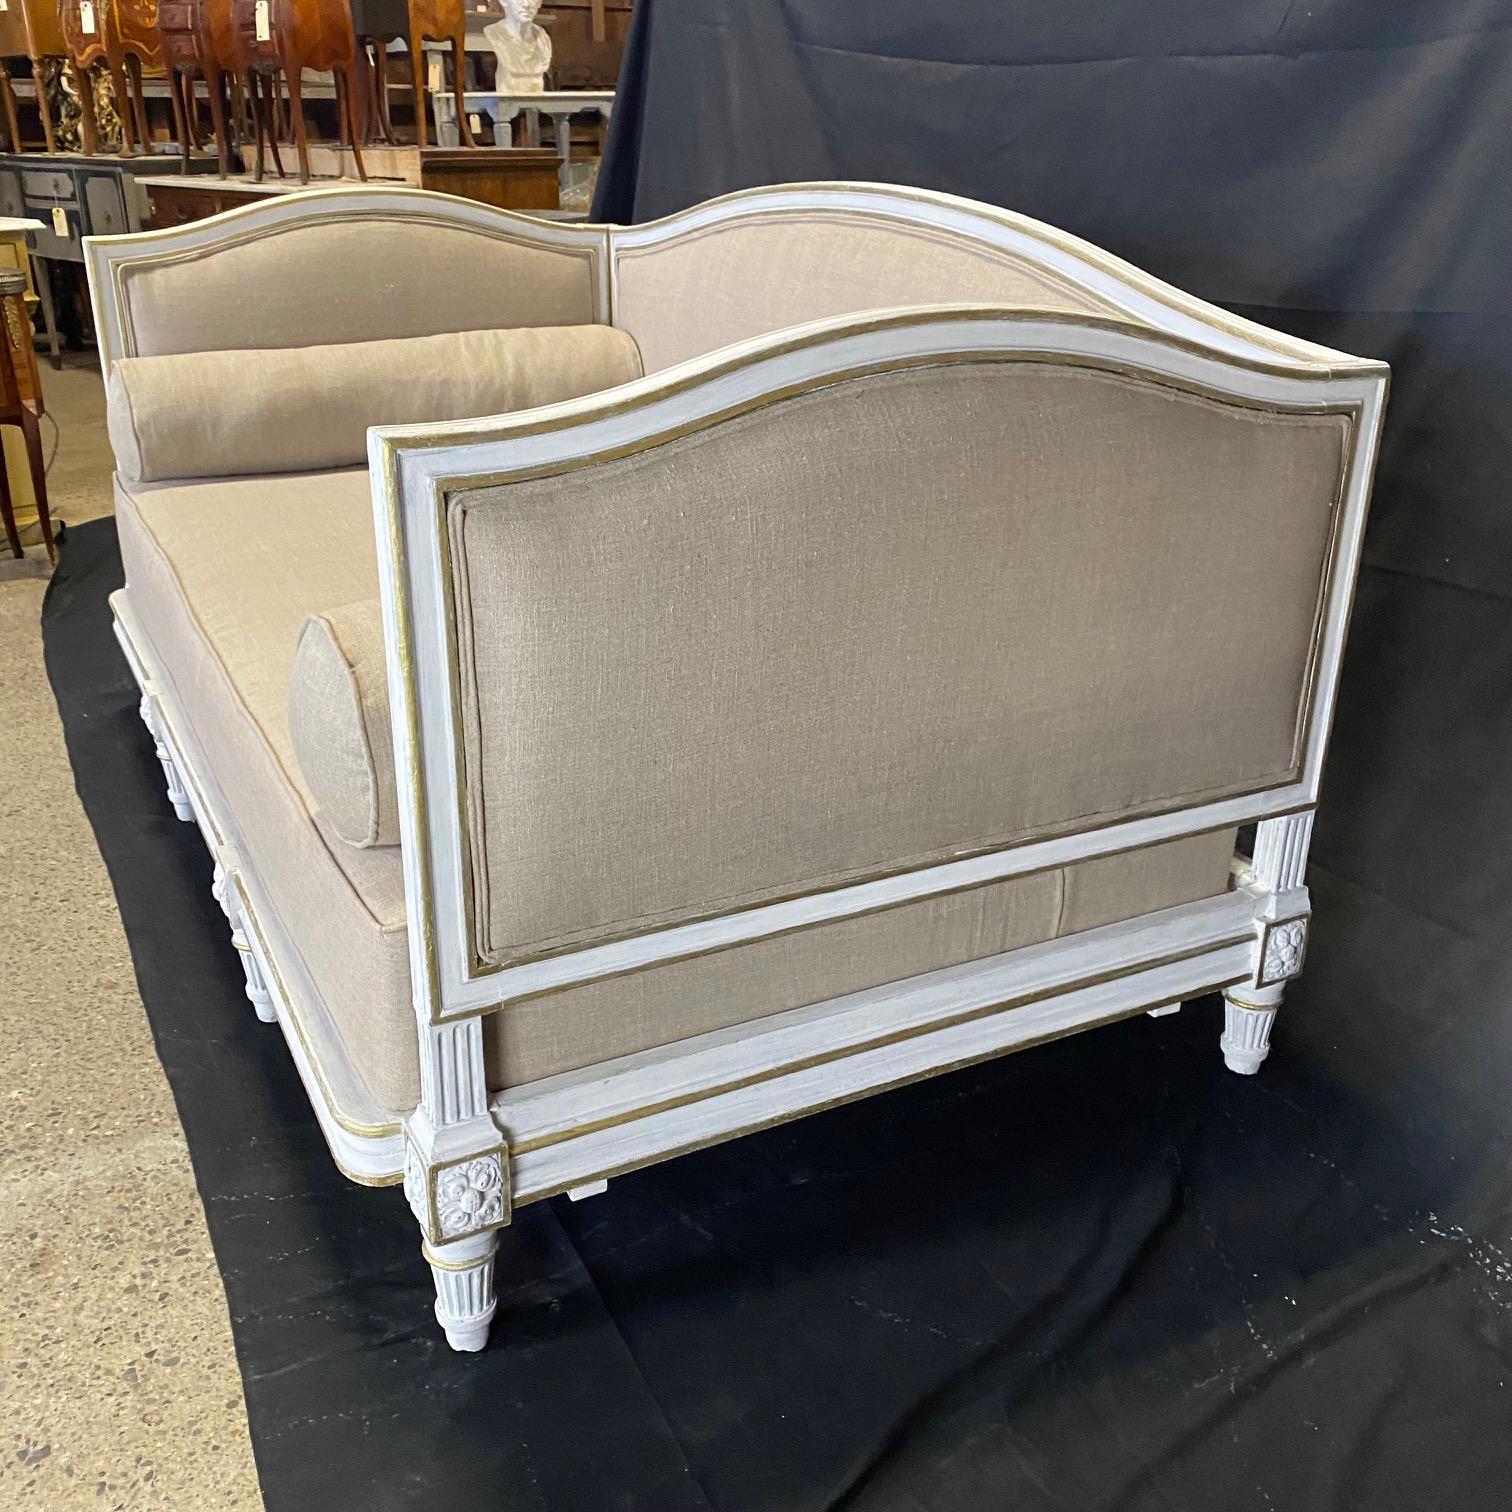 A fantastic Louis XVI restored daybed from France circa 1830’s. The ivory painted frame with gold gilt molding has a wonderful patina. Newly reupholstered in a neutral high quality grayish beige material, the daybed has two bolsters at either end.